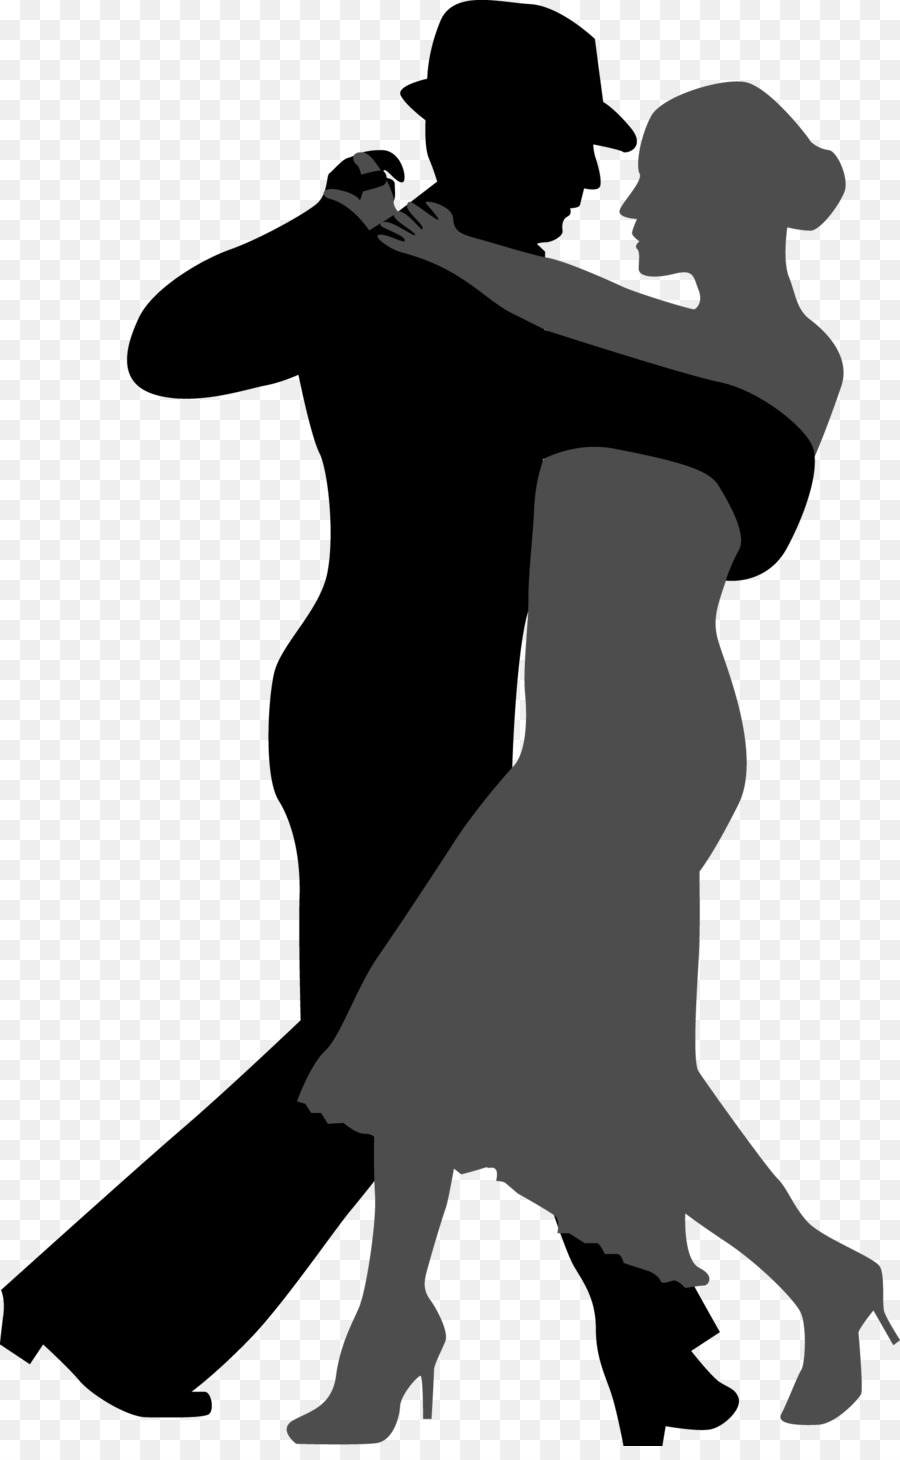 Free Two People Dancing Silhouette, Download Free Two People Dancing ...